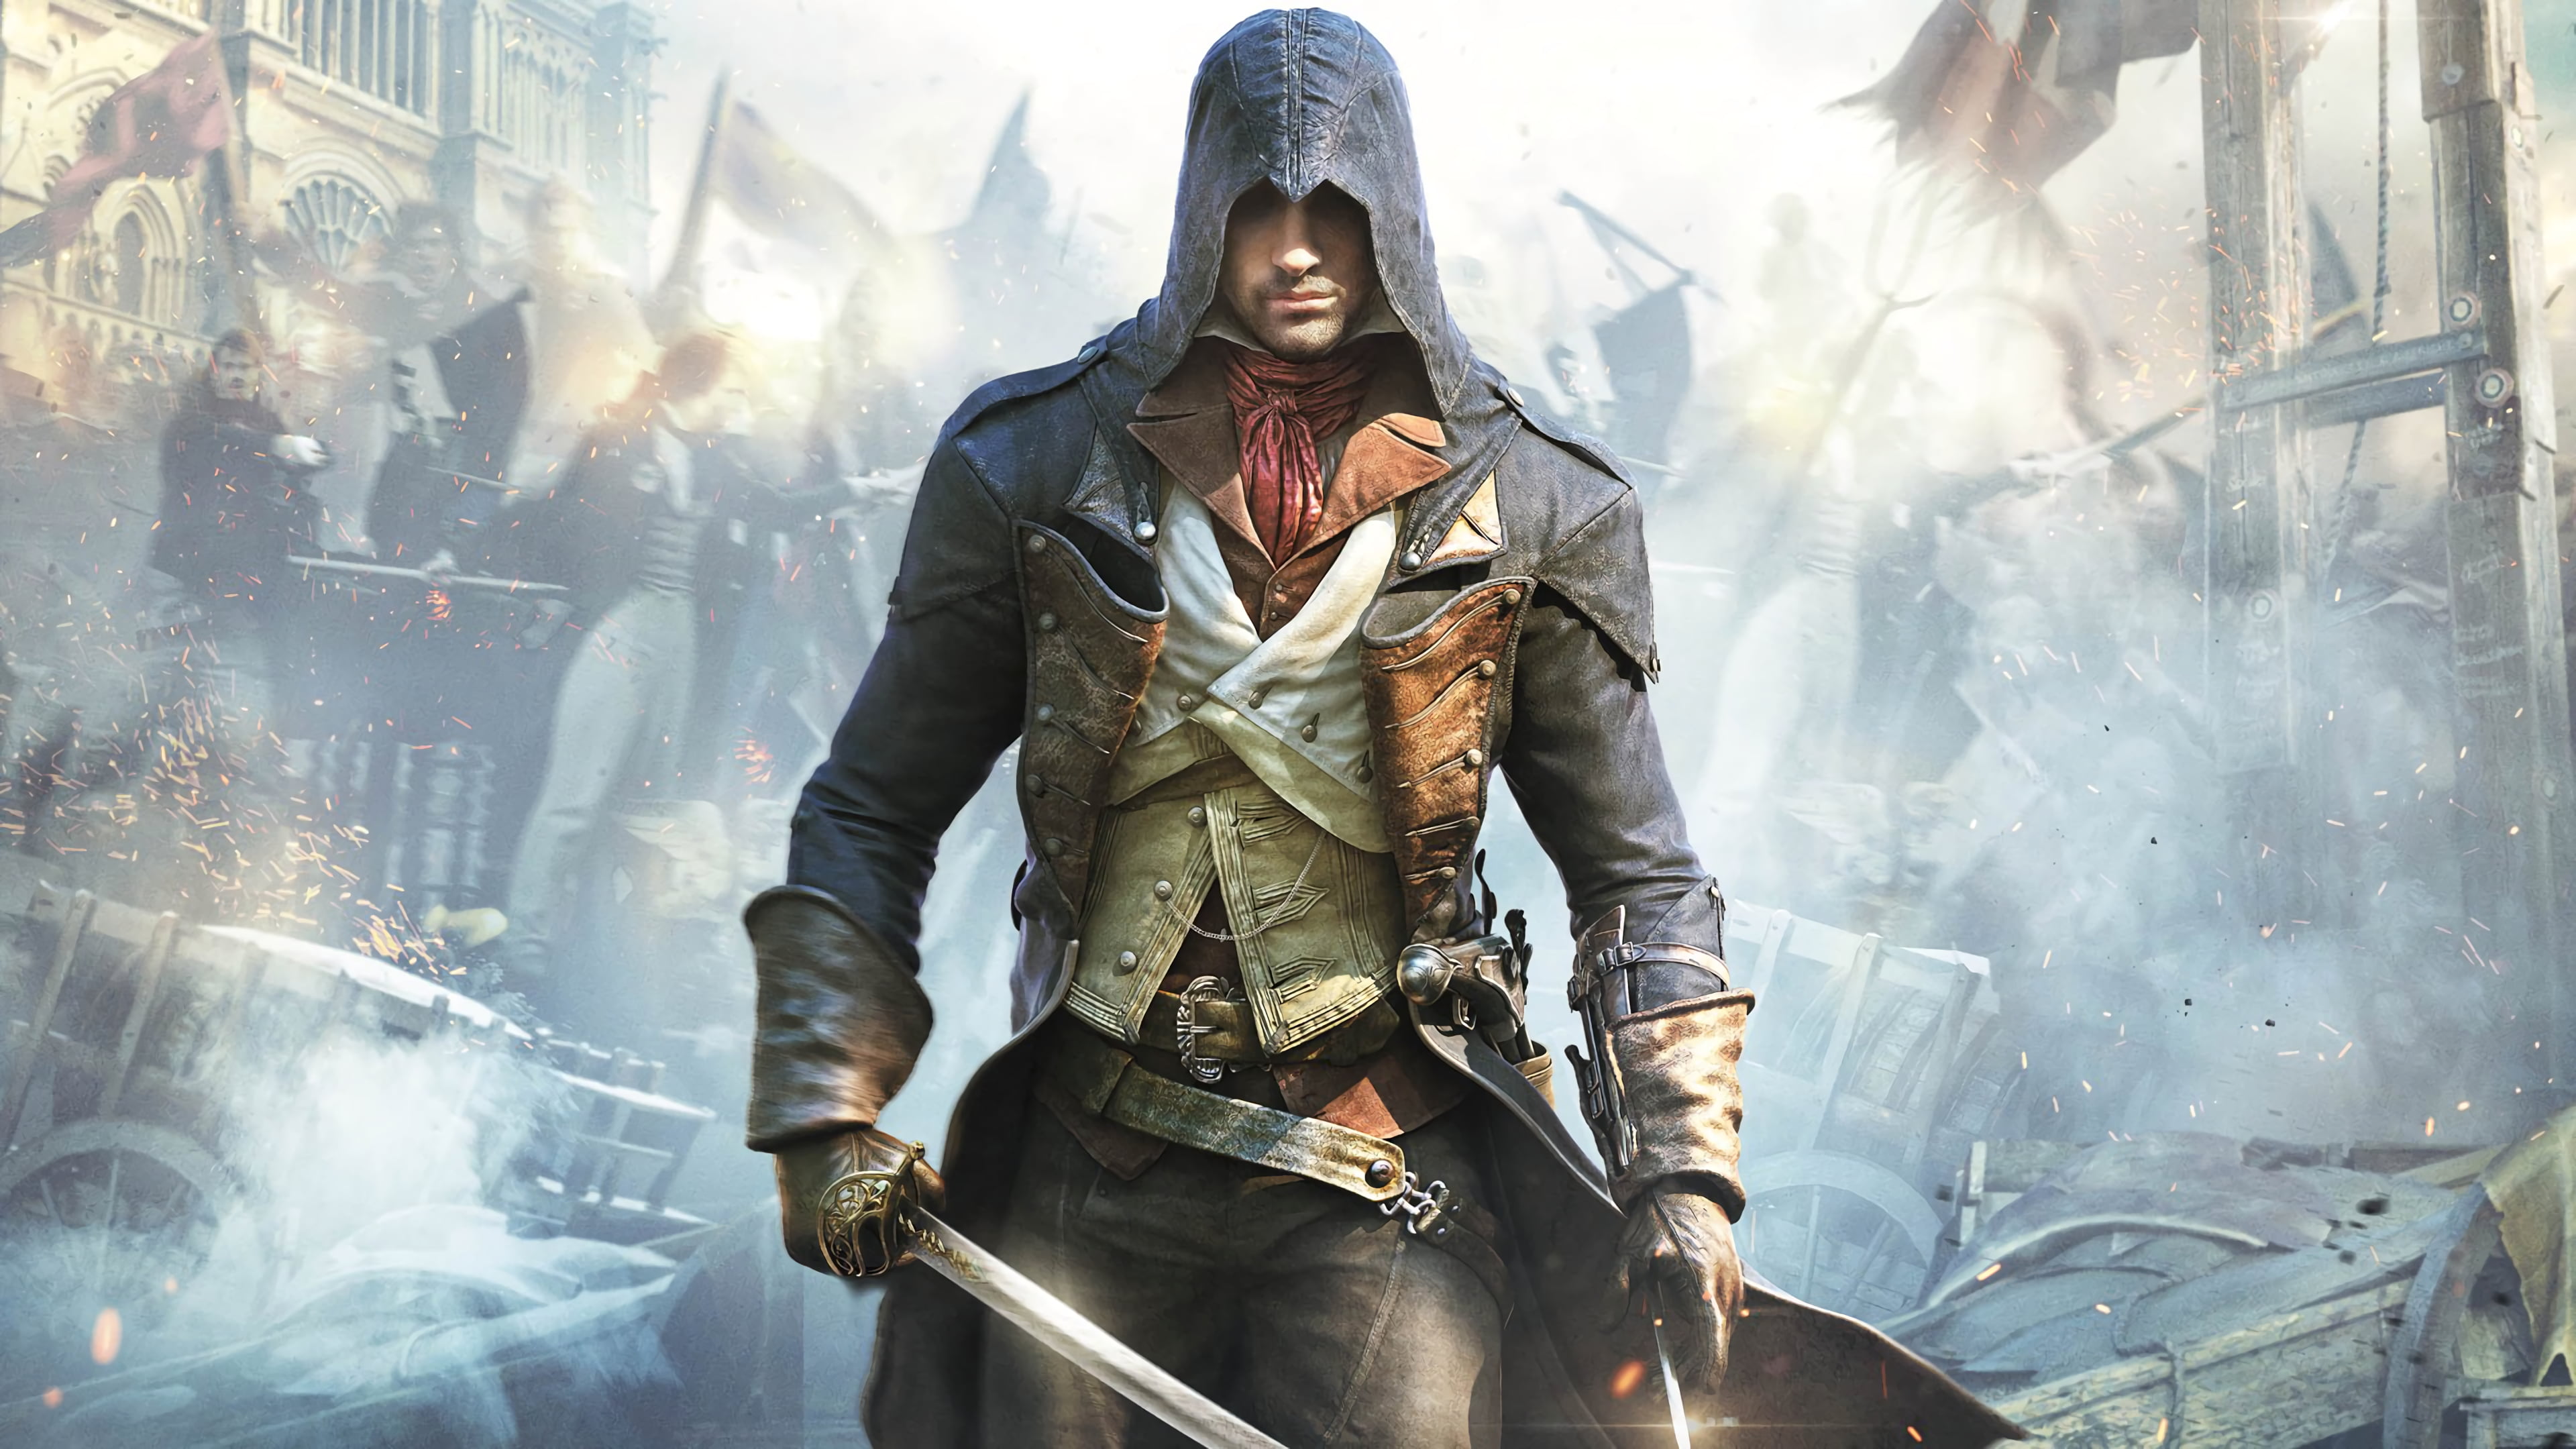 Assassin's Creed wallpaper, Assassin's Creed:  Unity, people